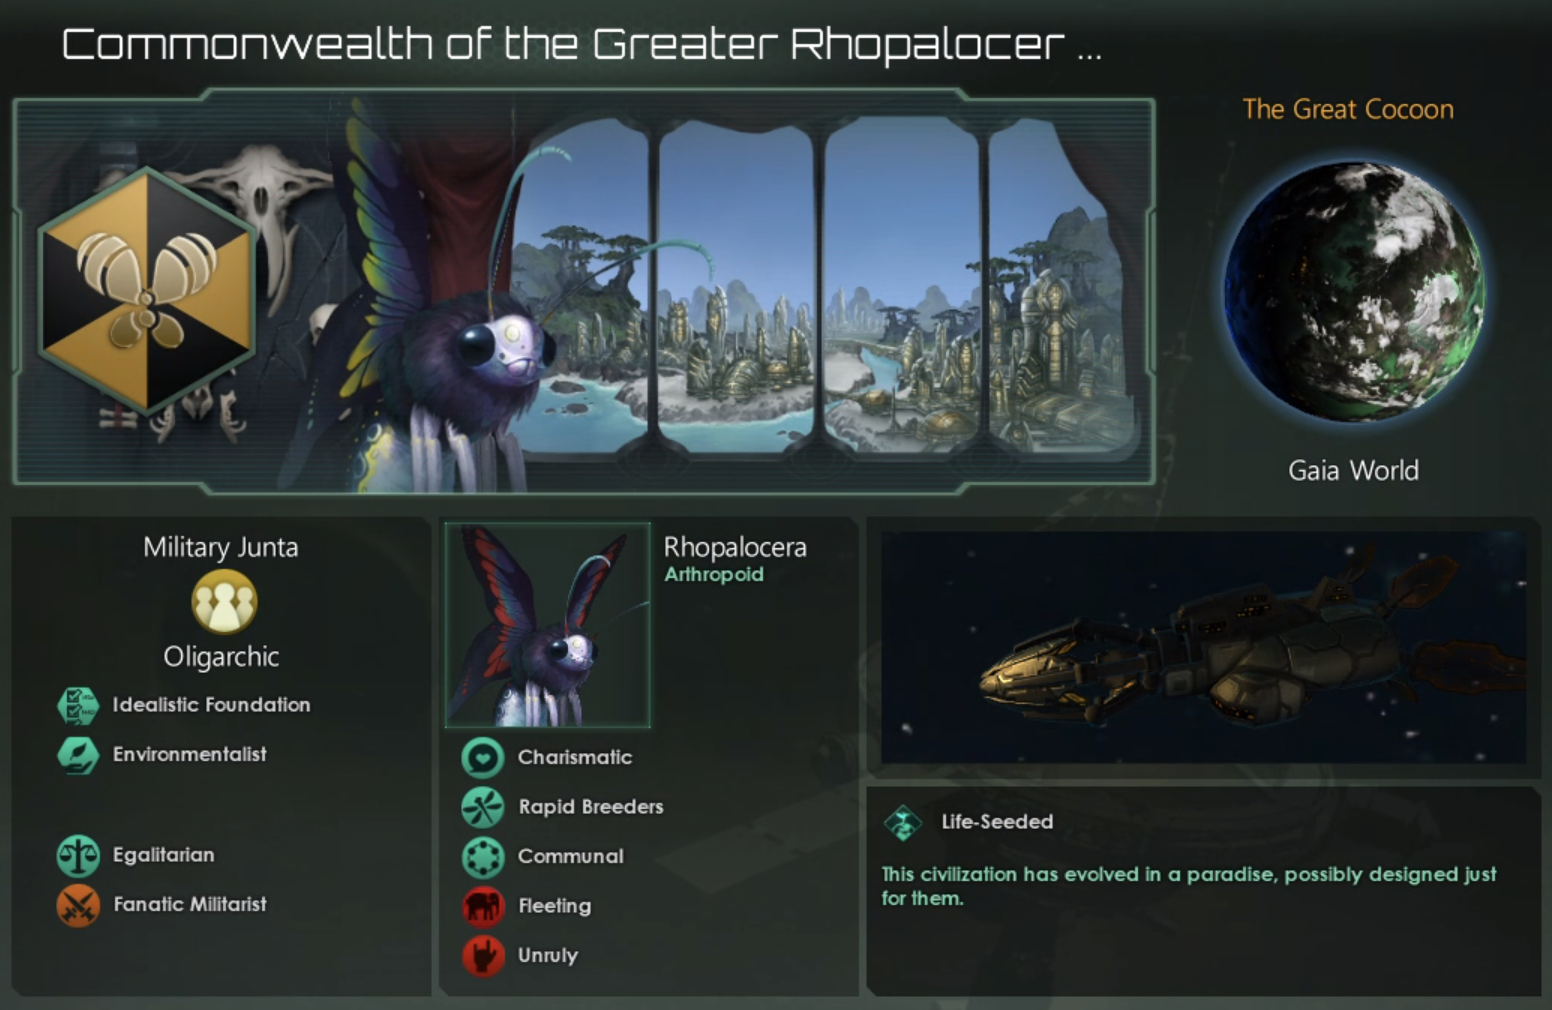 What is some advice a fellow Stellaris player can give to a